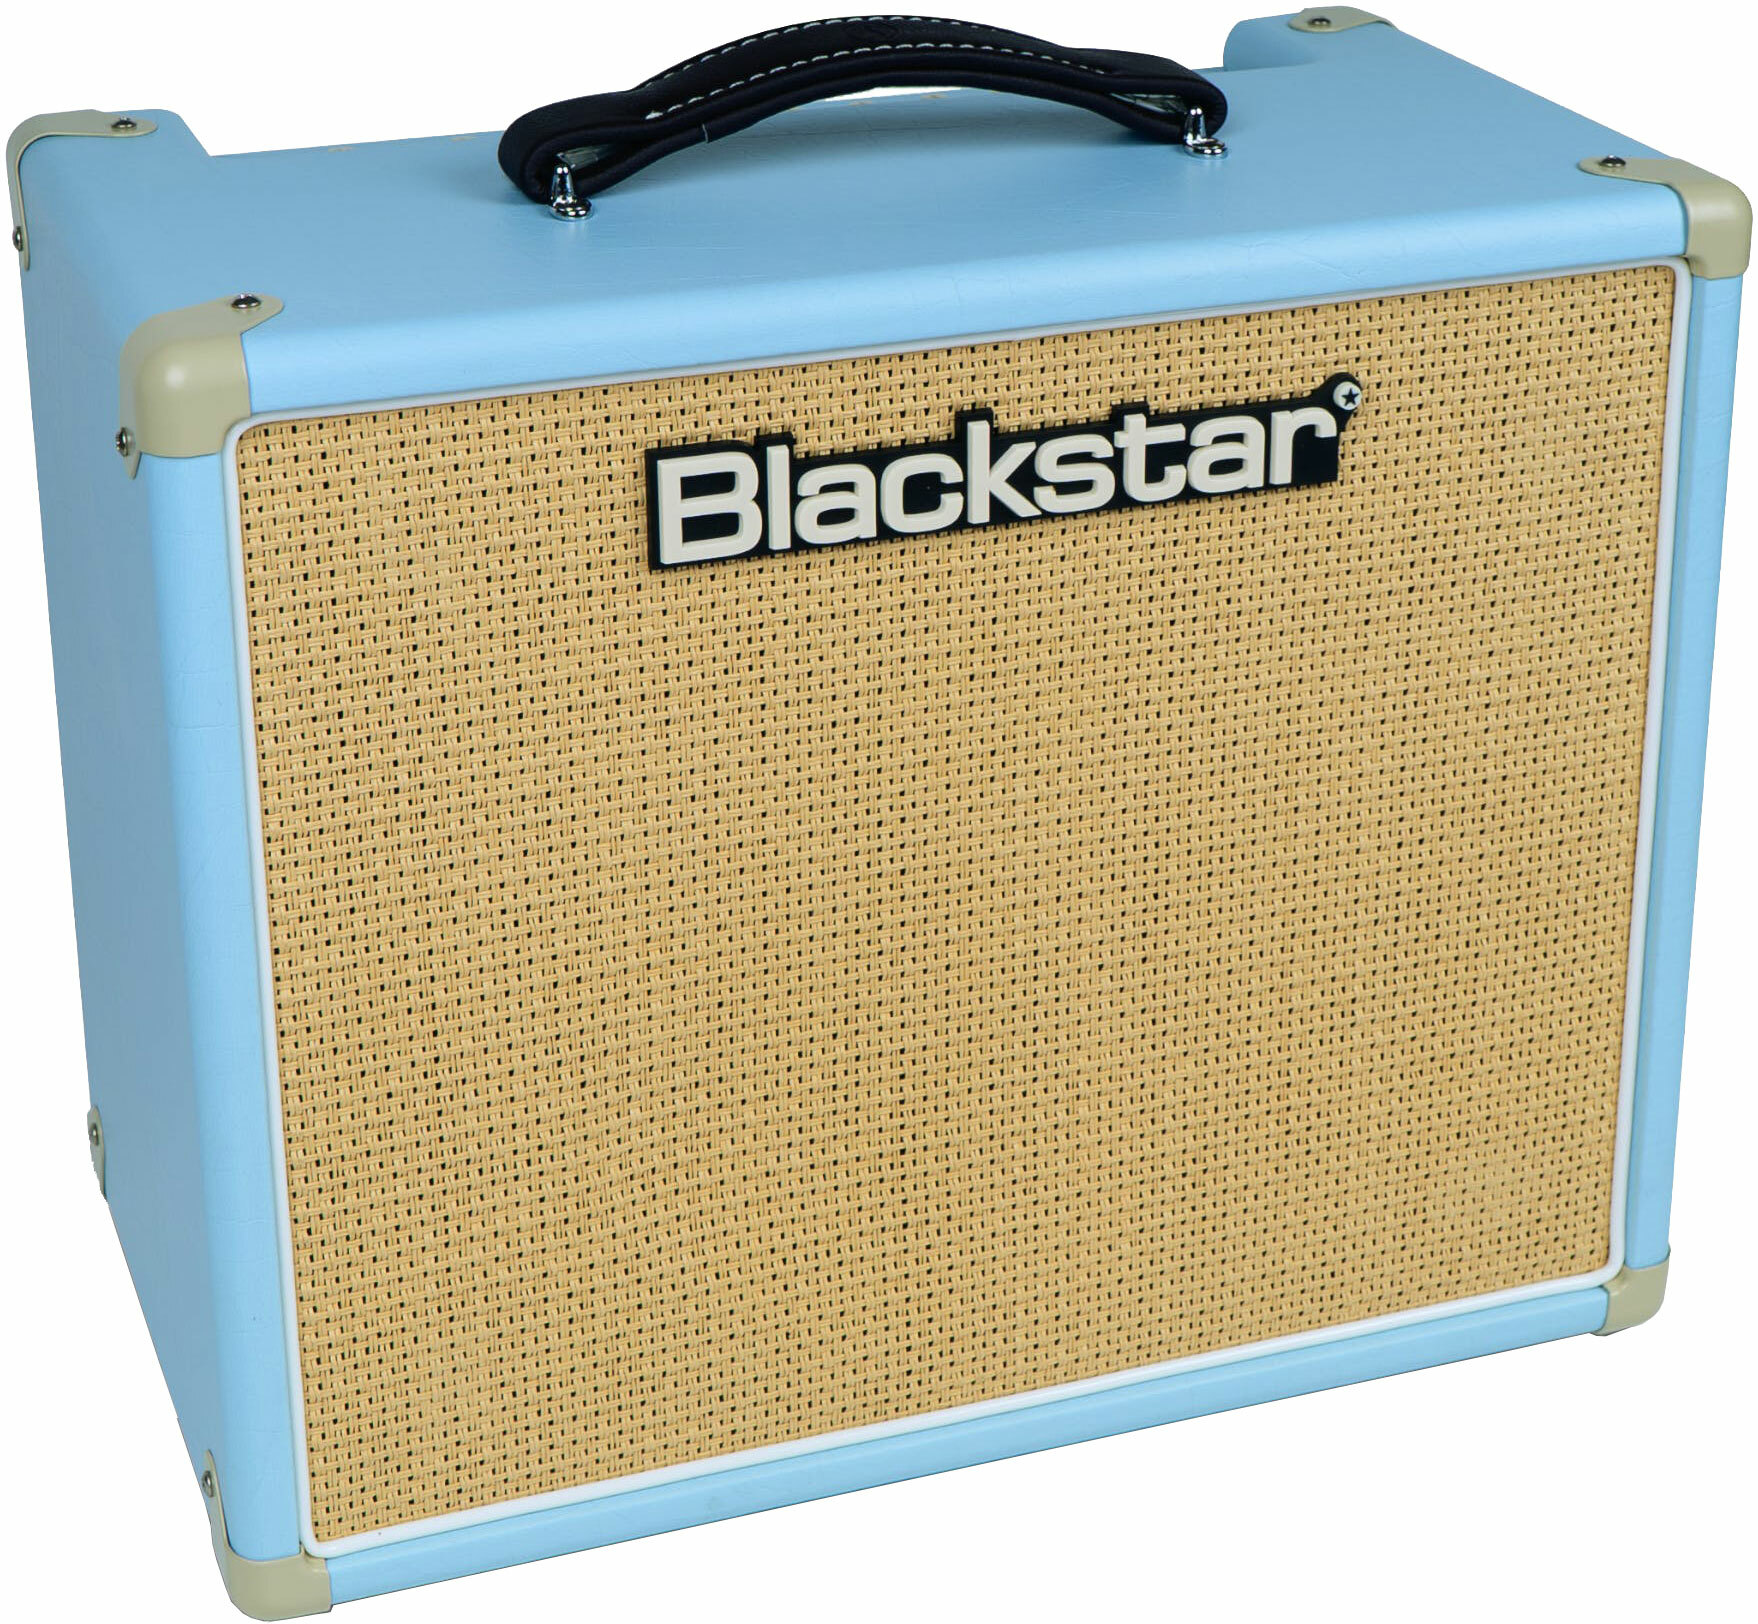 Blackstar Ht-5r Mkii 0.5/5w 1x12 Baby Blue - Electric guitar combo amp - Main picture